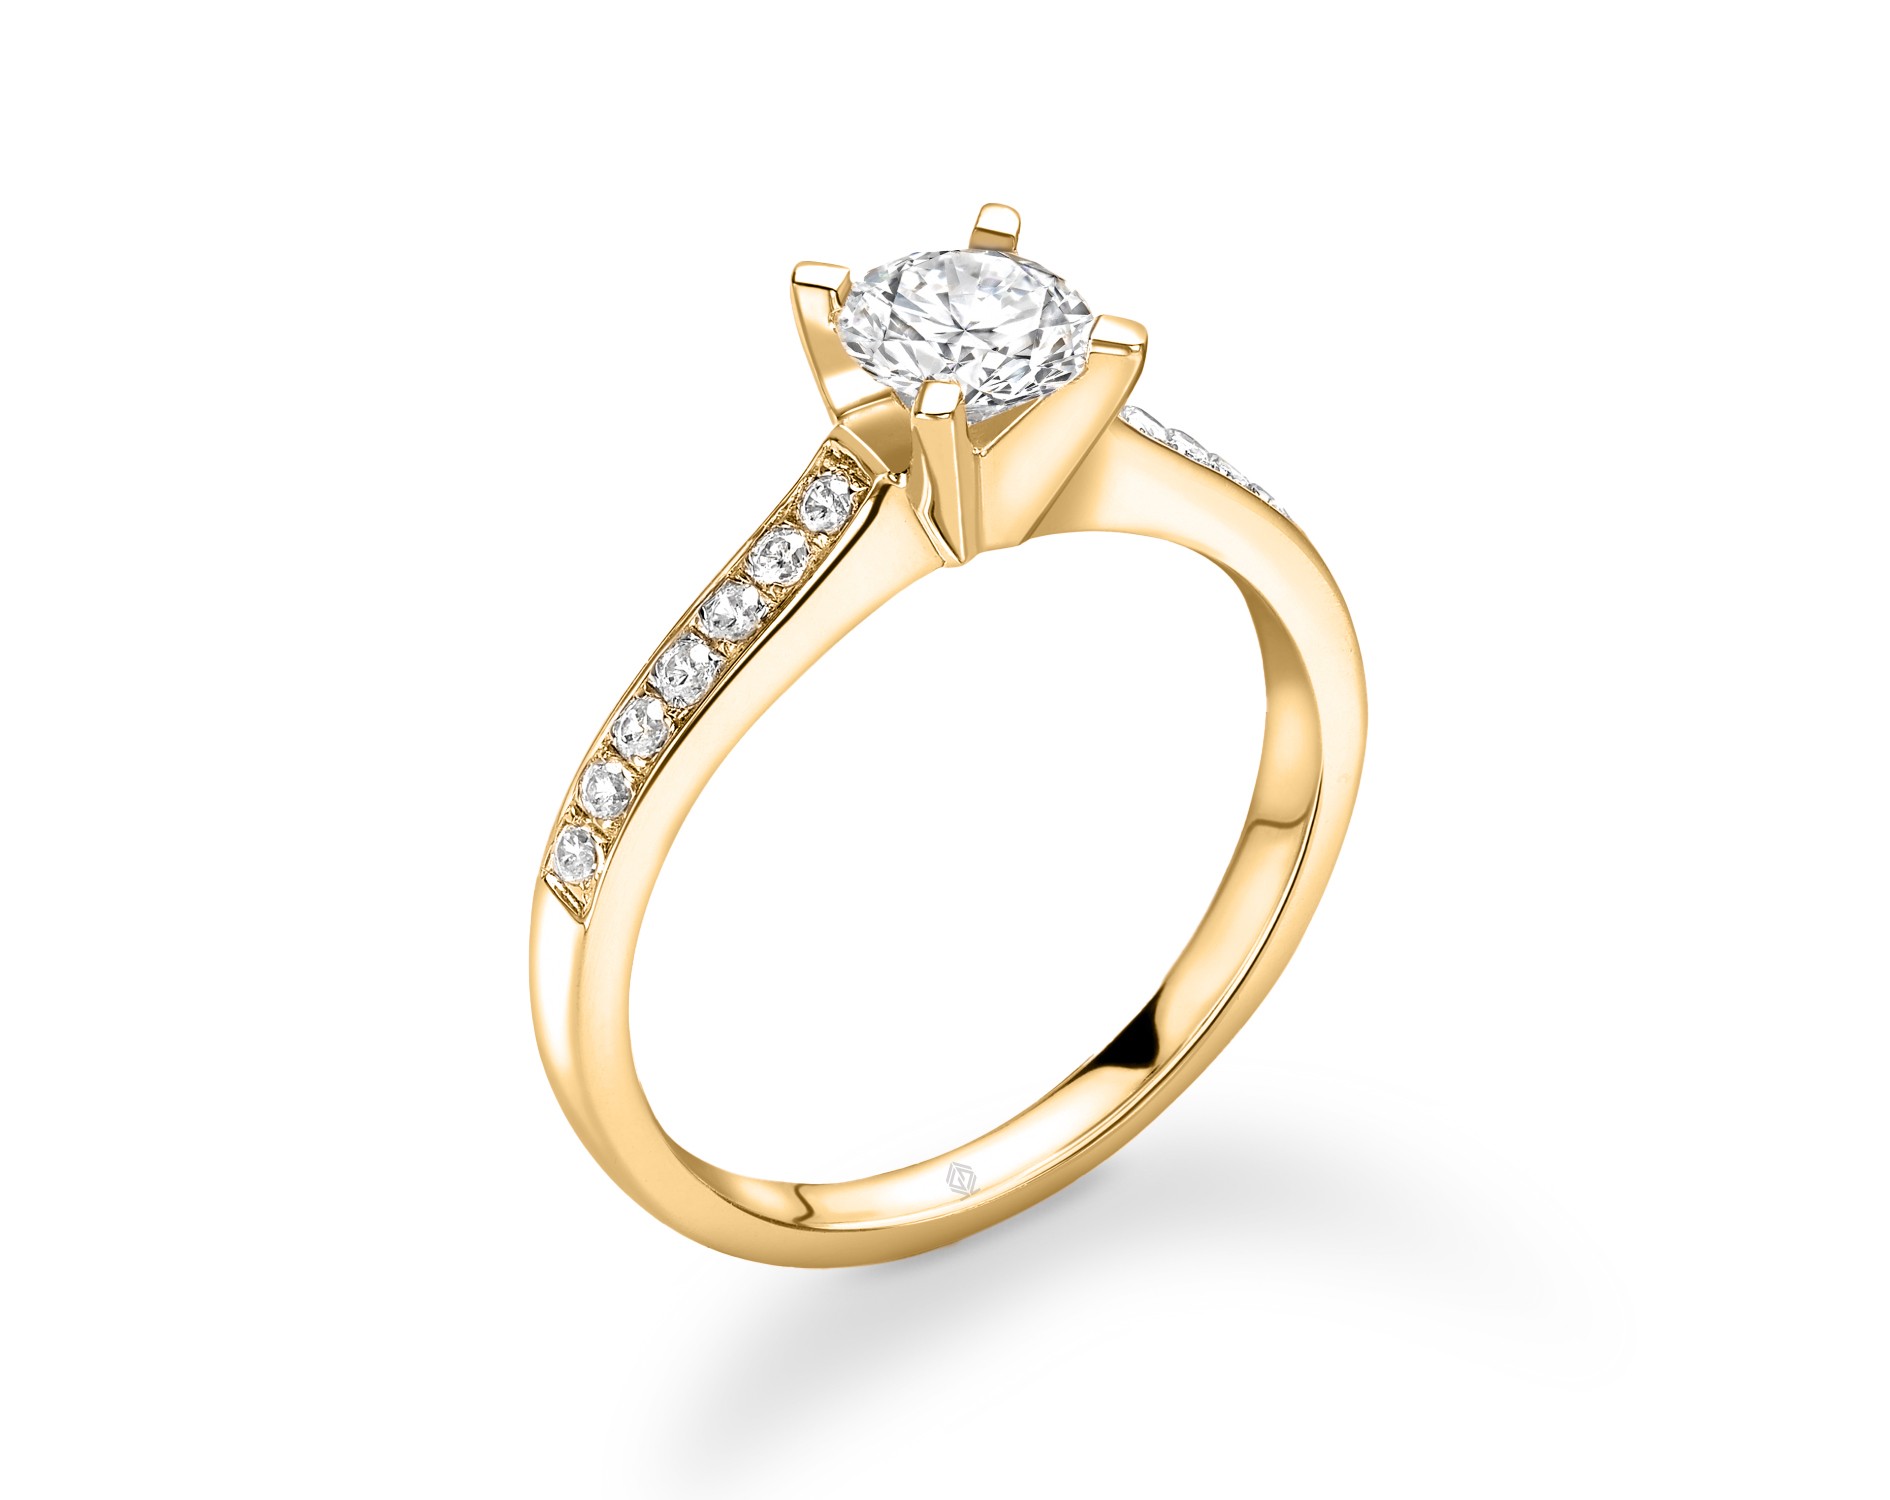 18K YELLOW GOLD ROUND CUT 4 PRONGS DIAMOND ENGAGEMENT RING WITH SIDE STONES CHANNEL SET